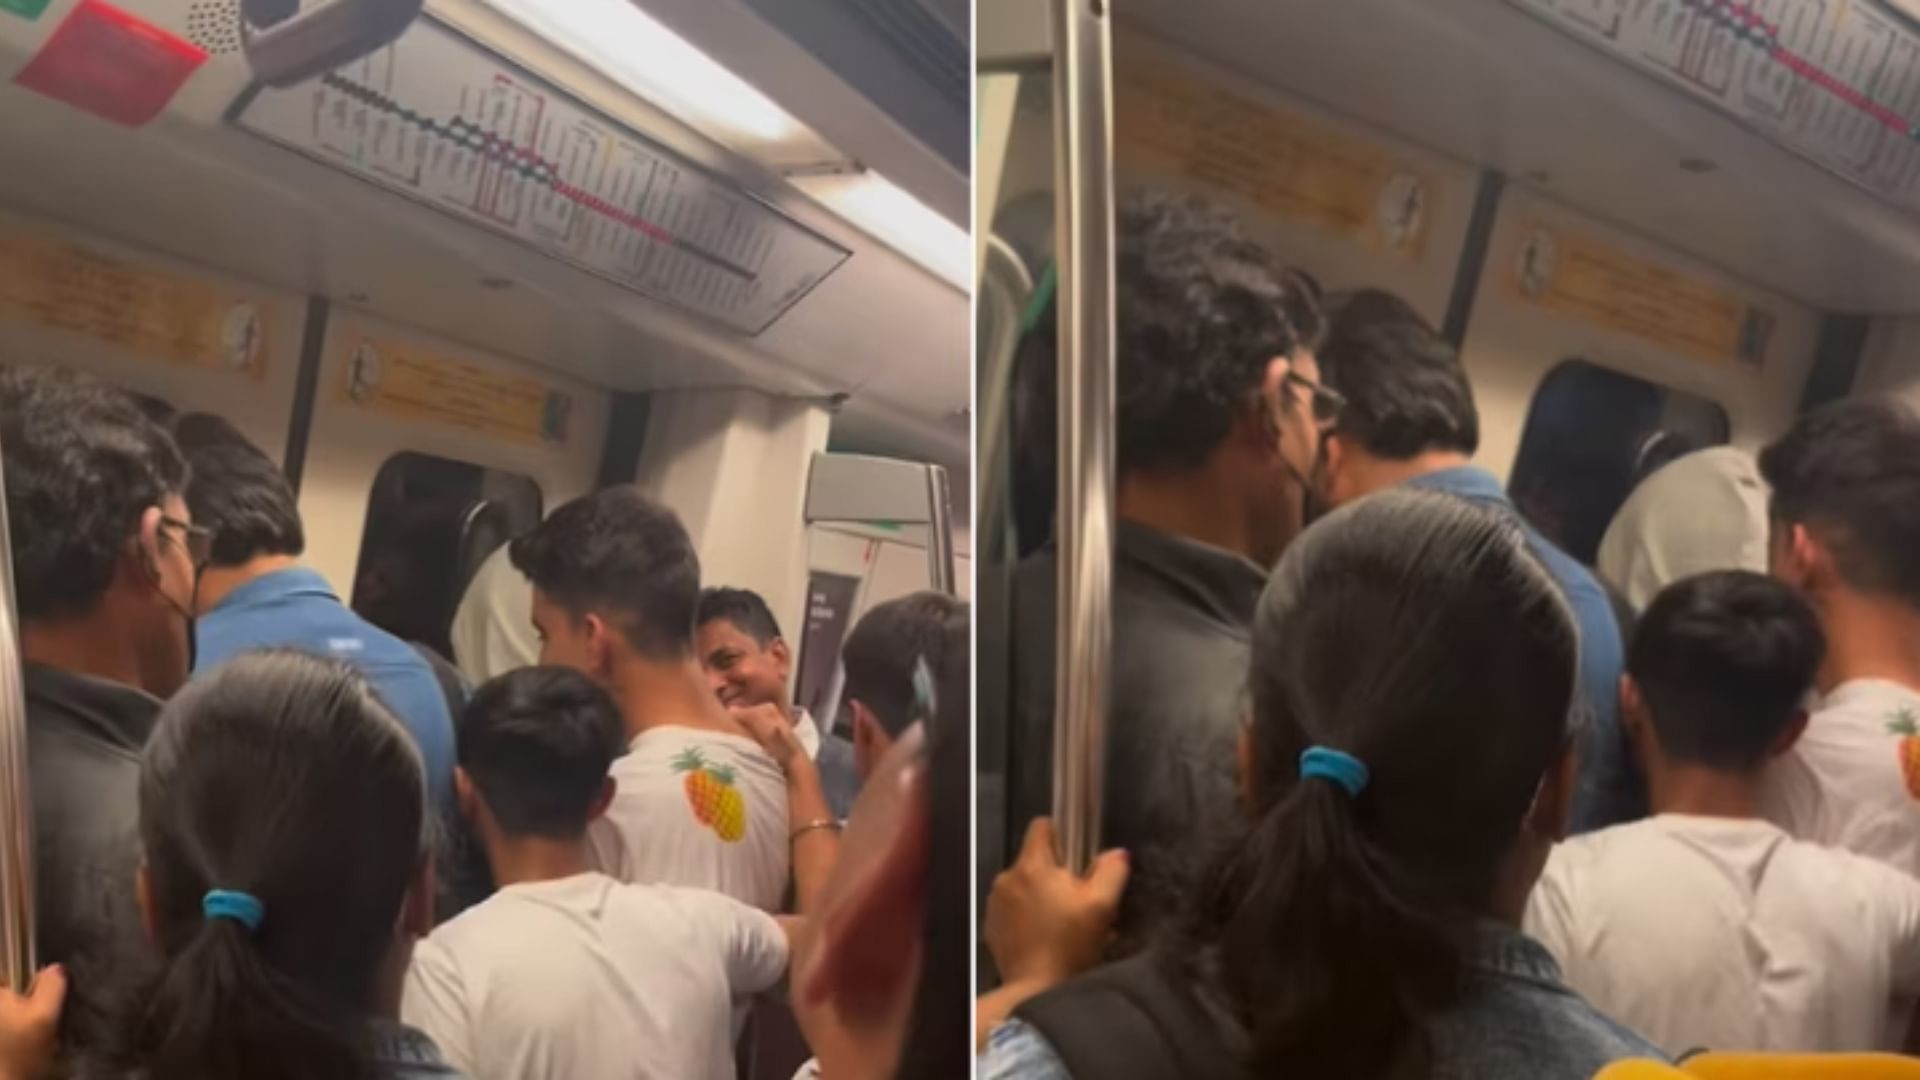 Delhi Metro driver mistakenly played haryanvi song in the metro video went viral